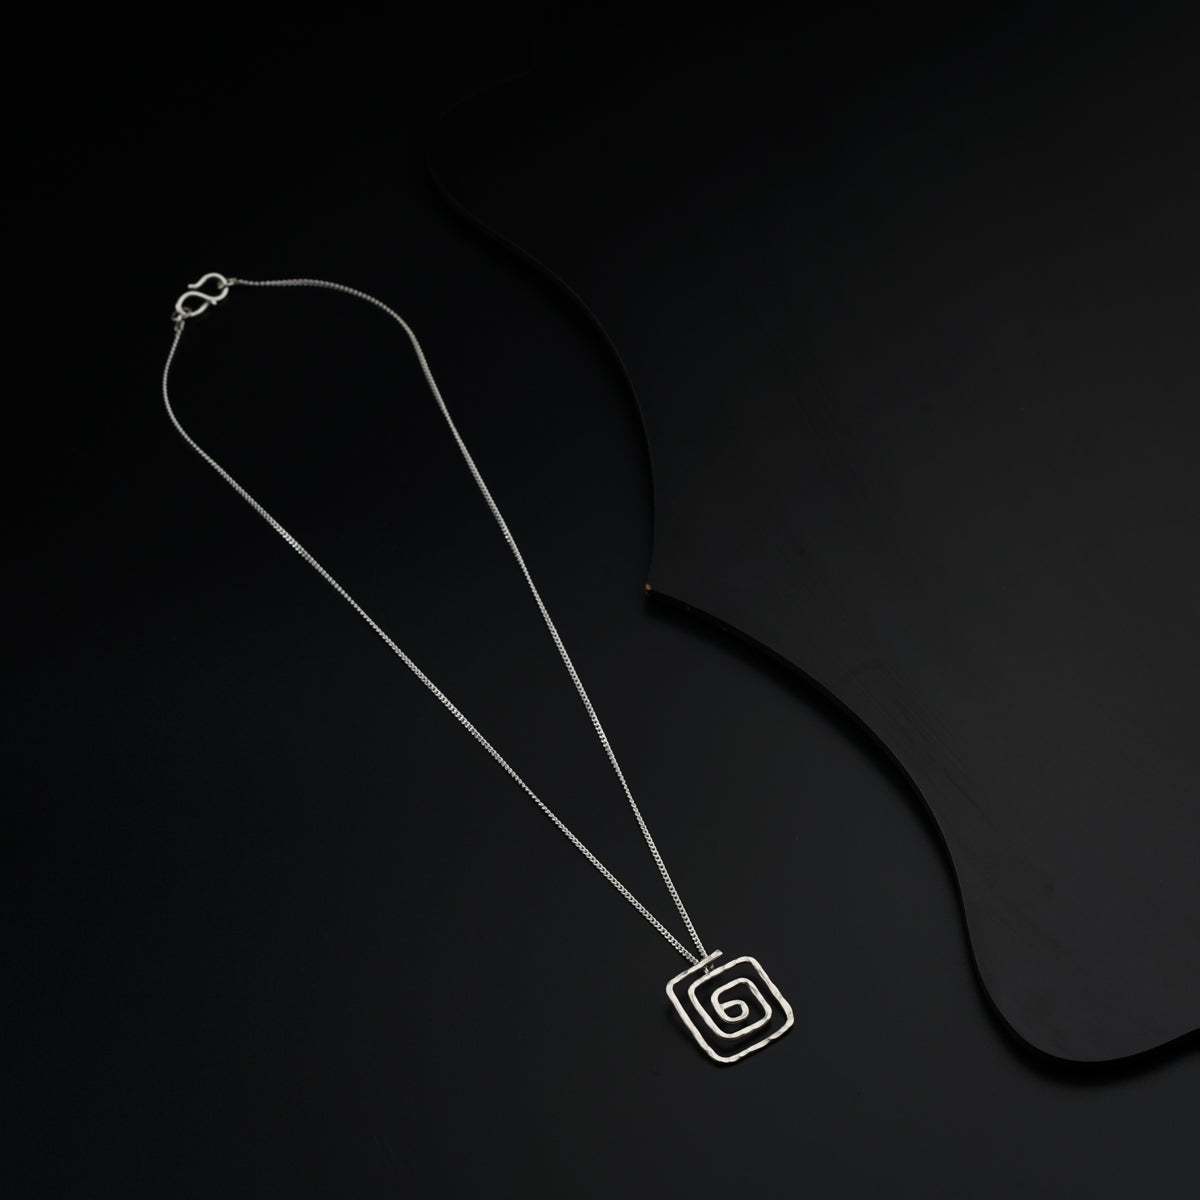 a black and white photo of a necklace on a black background